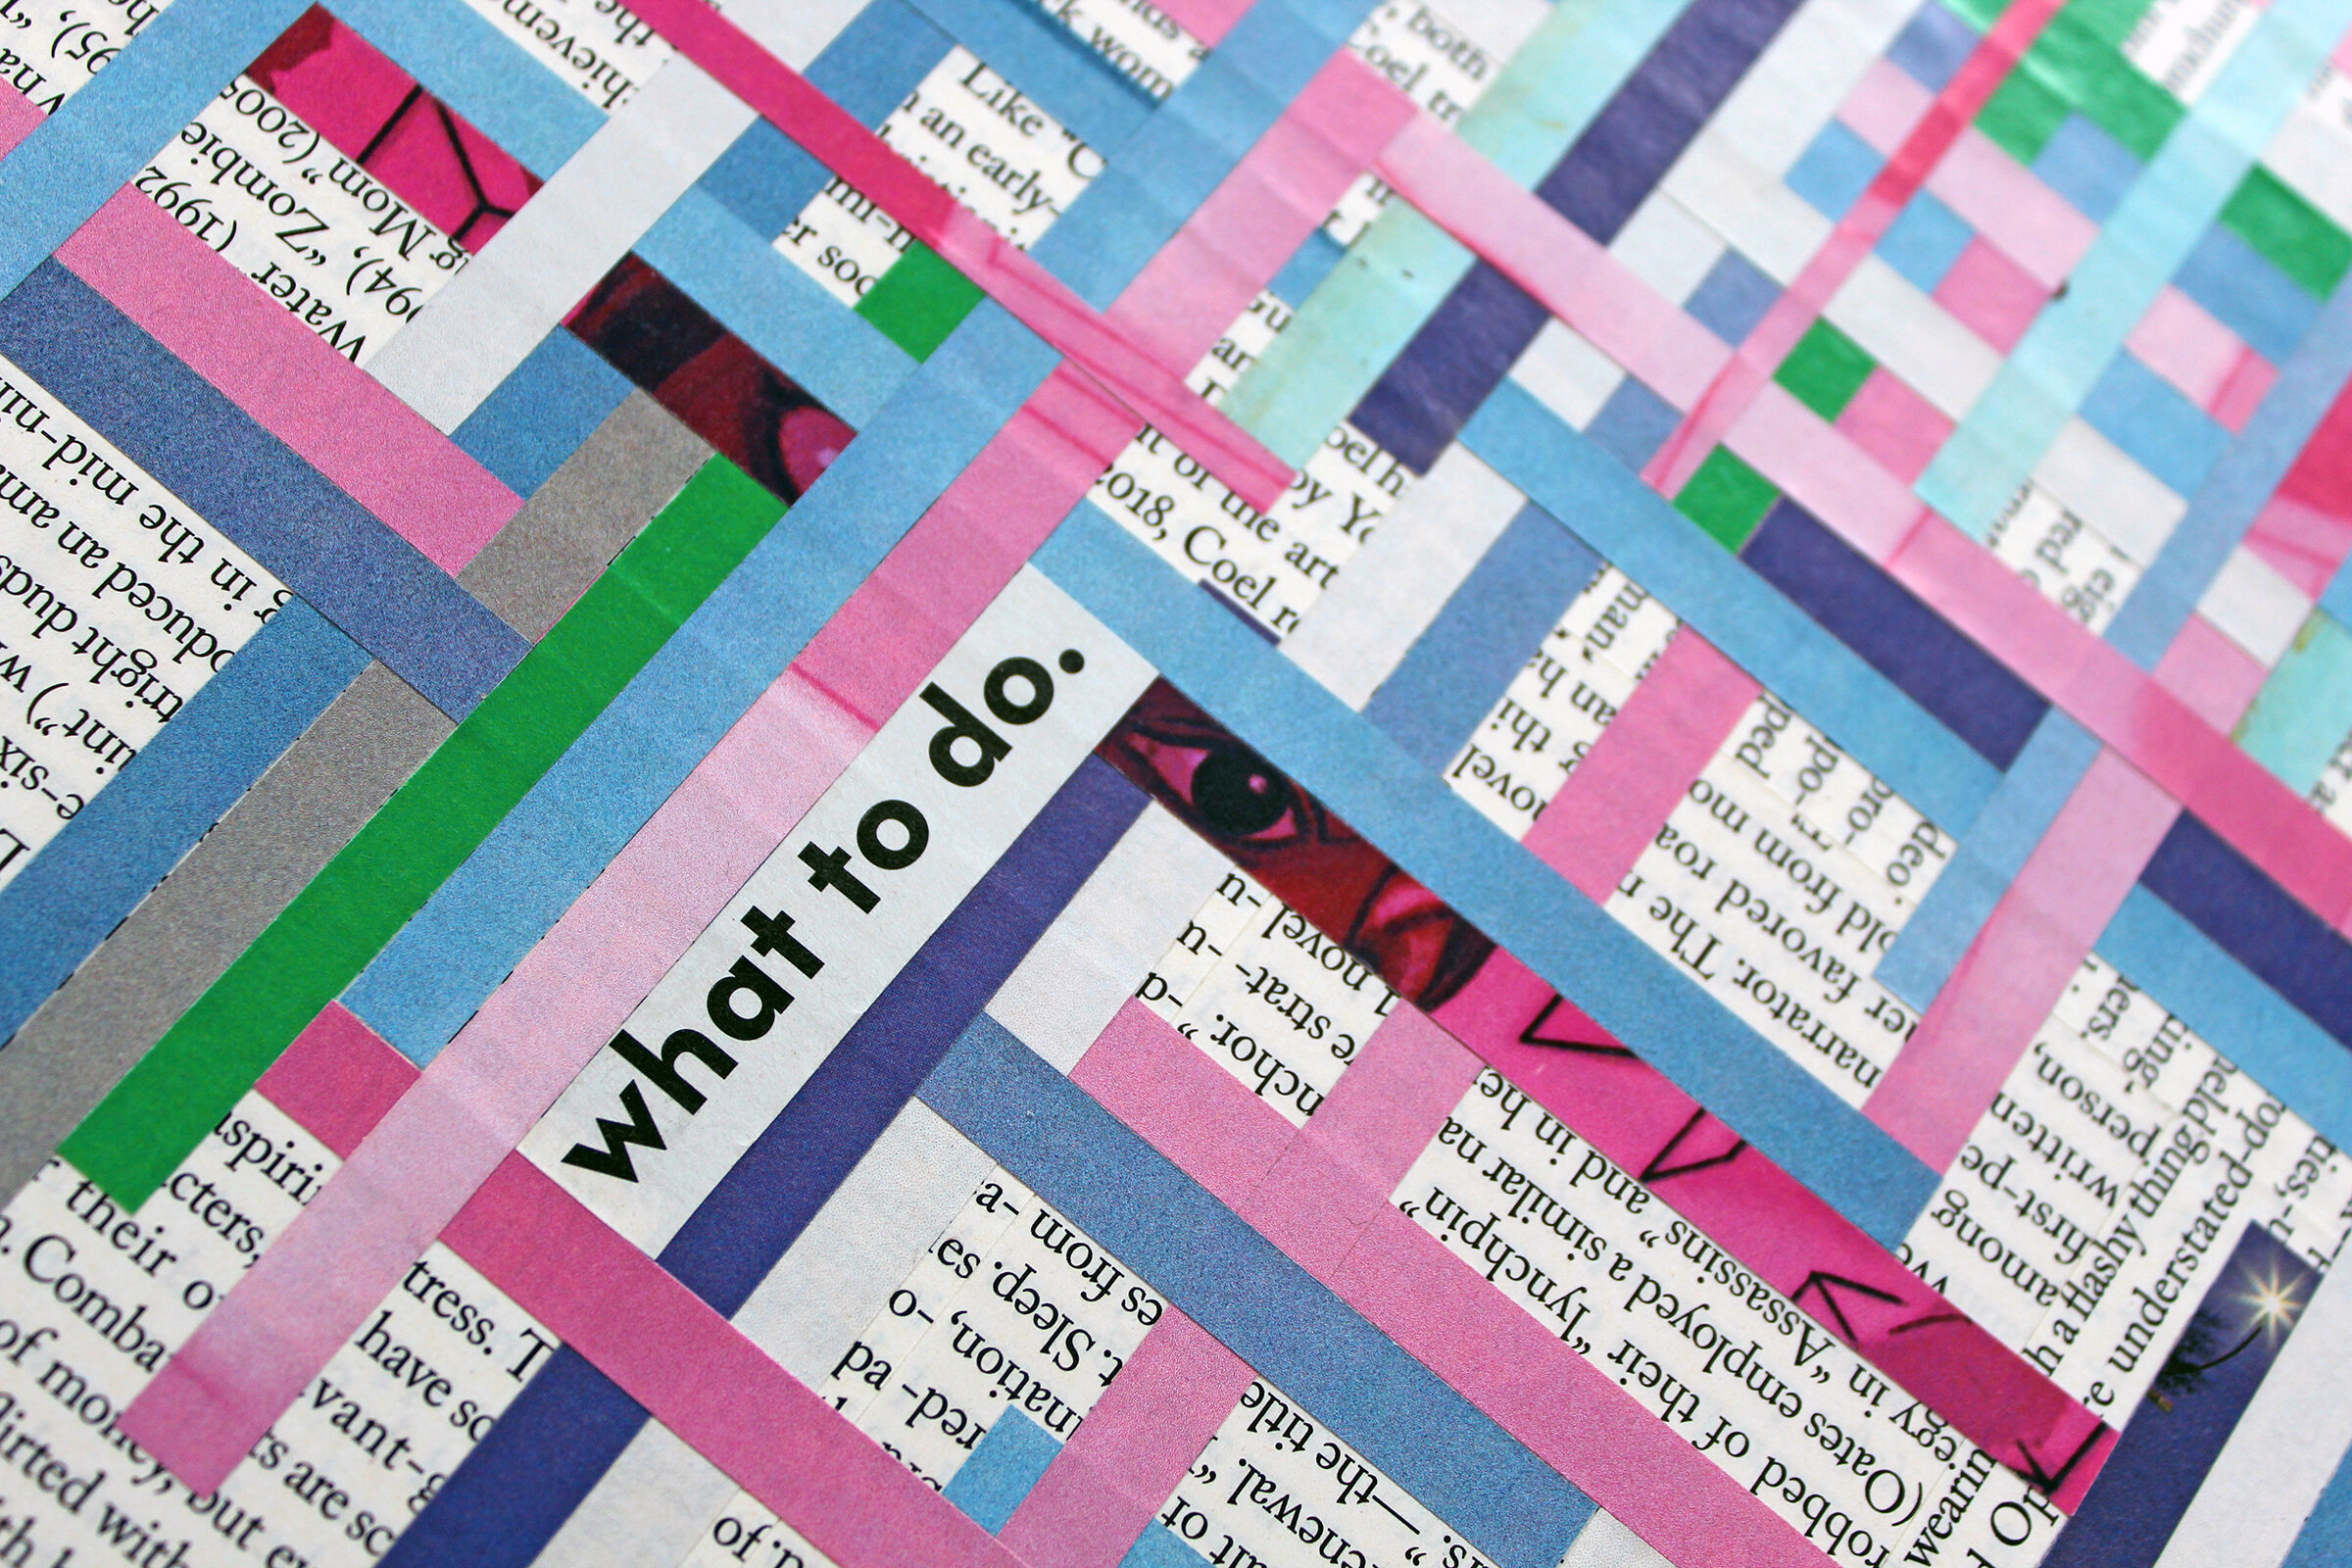  Detail – “Where to go, what to do.” 